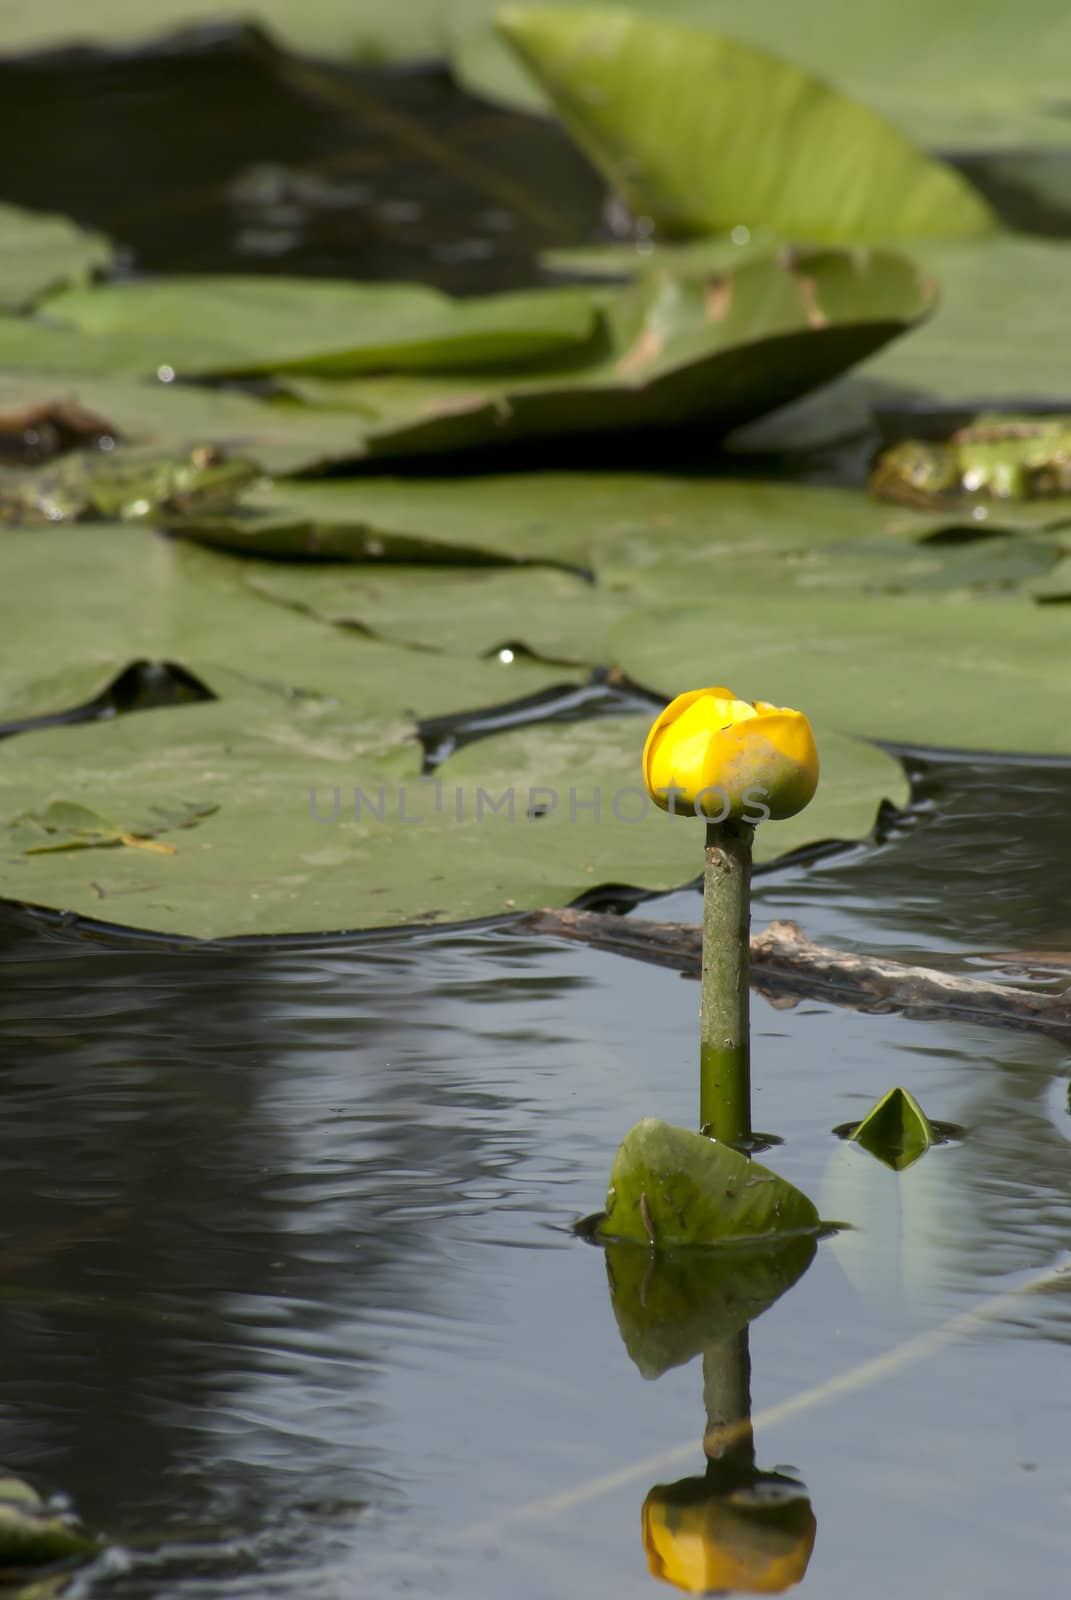 Water lily among the leaves at a pond